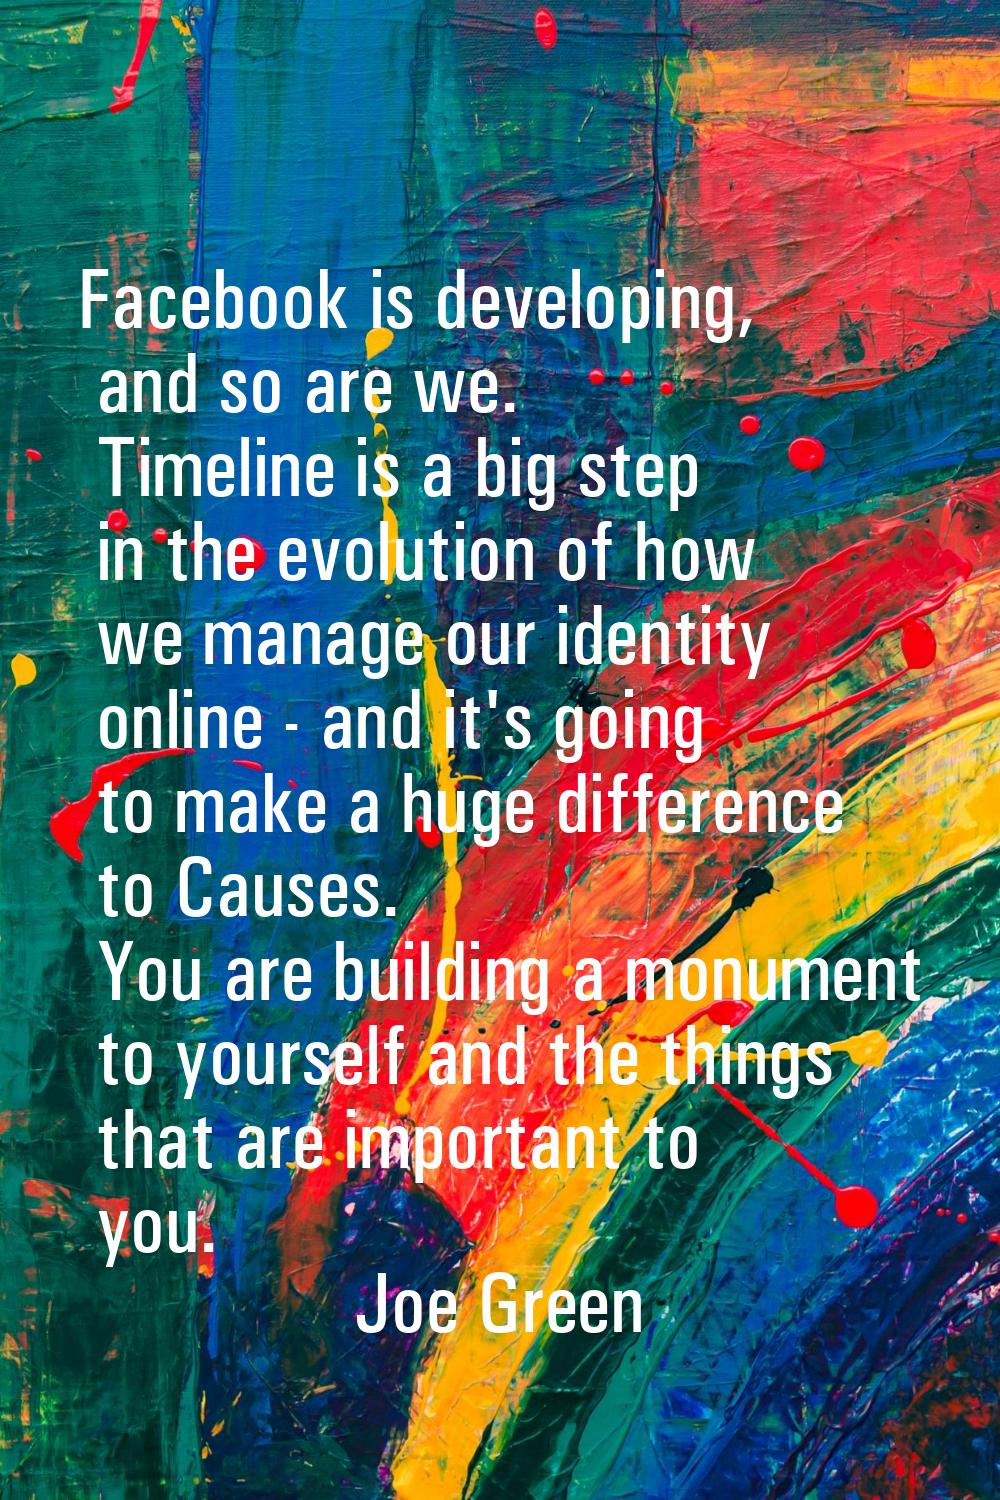 Facebook is developing, and so are we. Timeline is a big step in the evolution of how we manage our